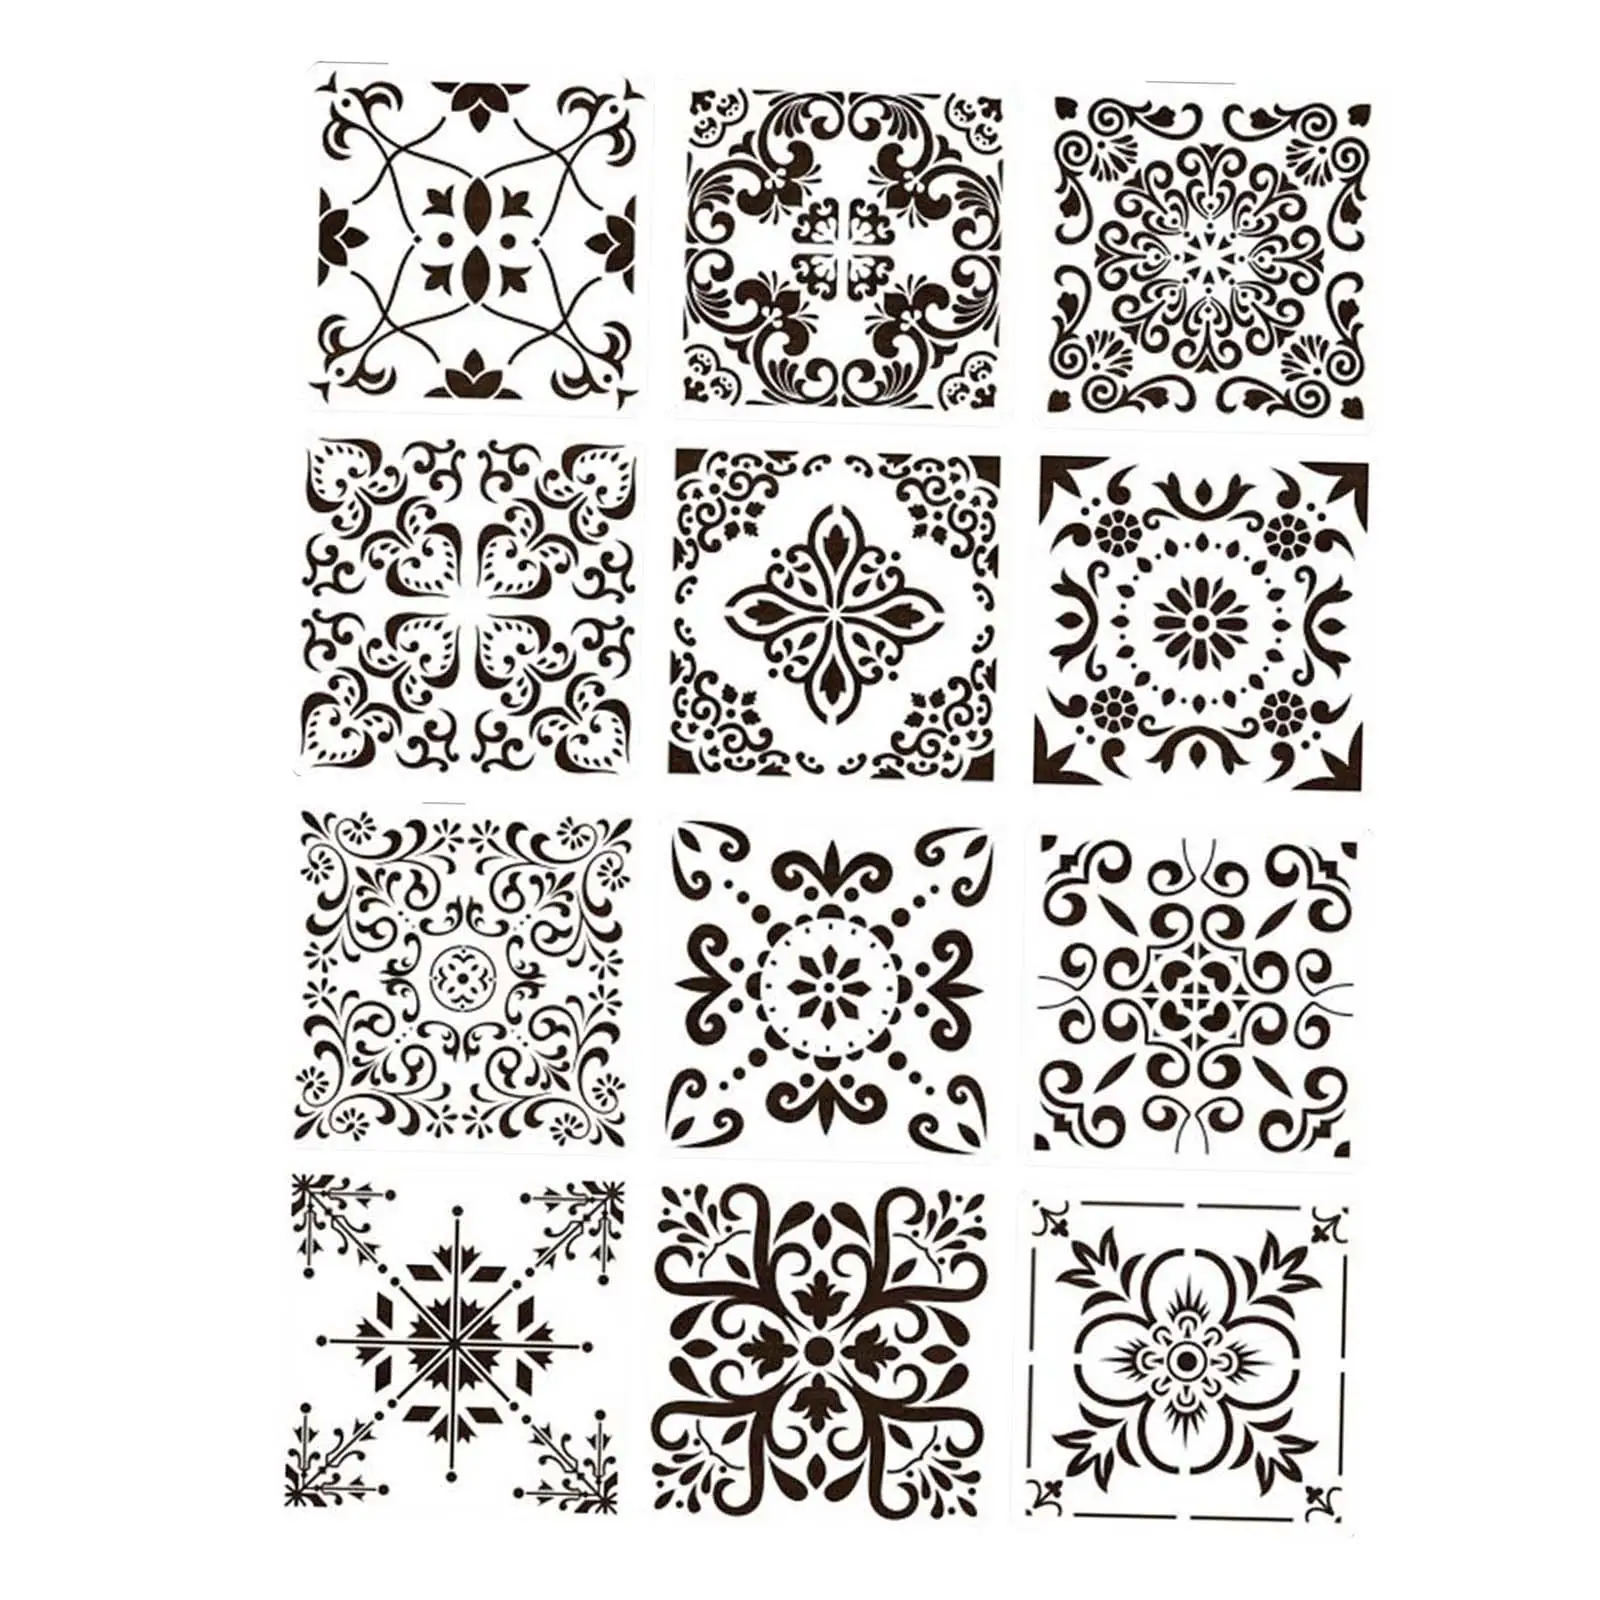 12x Mandala Stencil Template Reused Drawing Templates for Walls Furniture